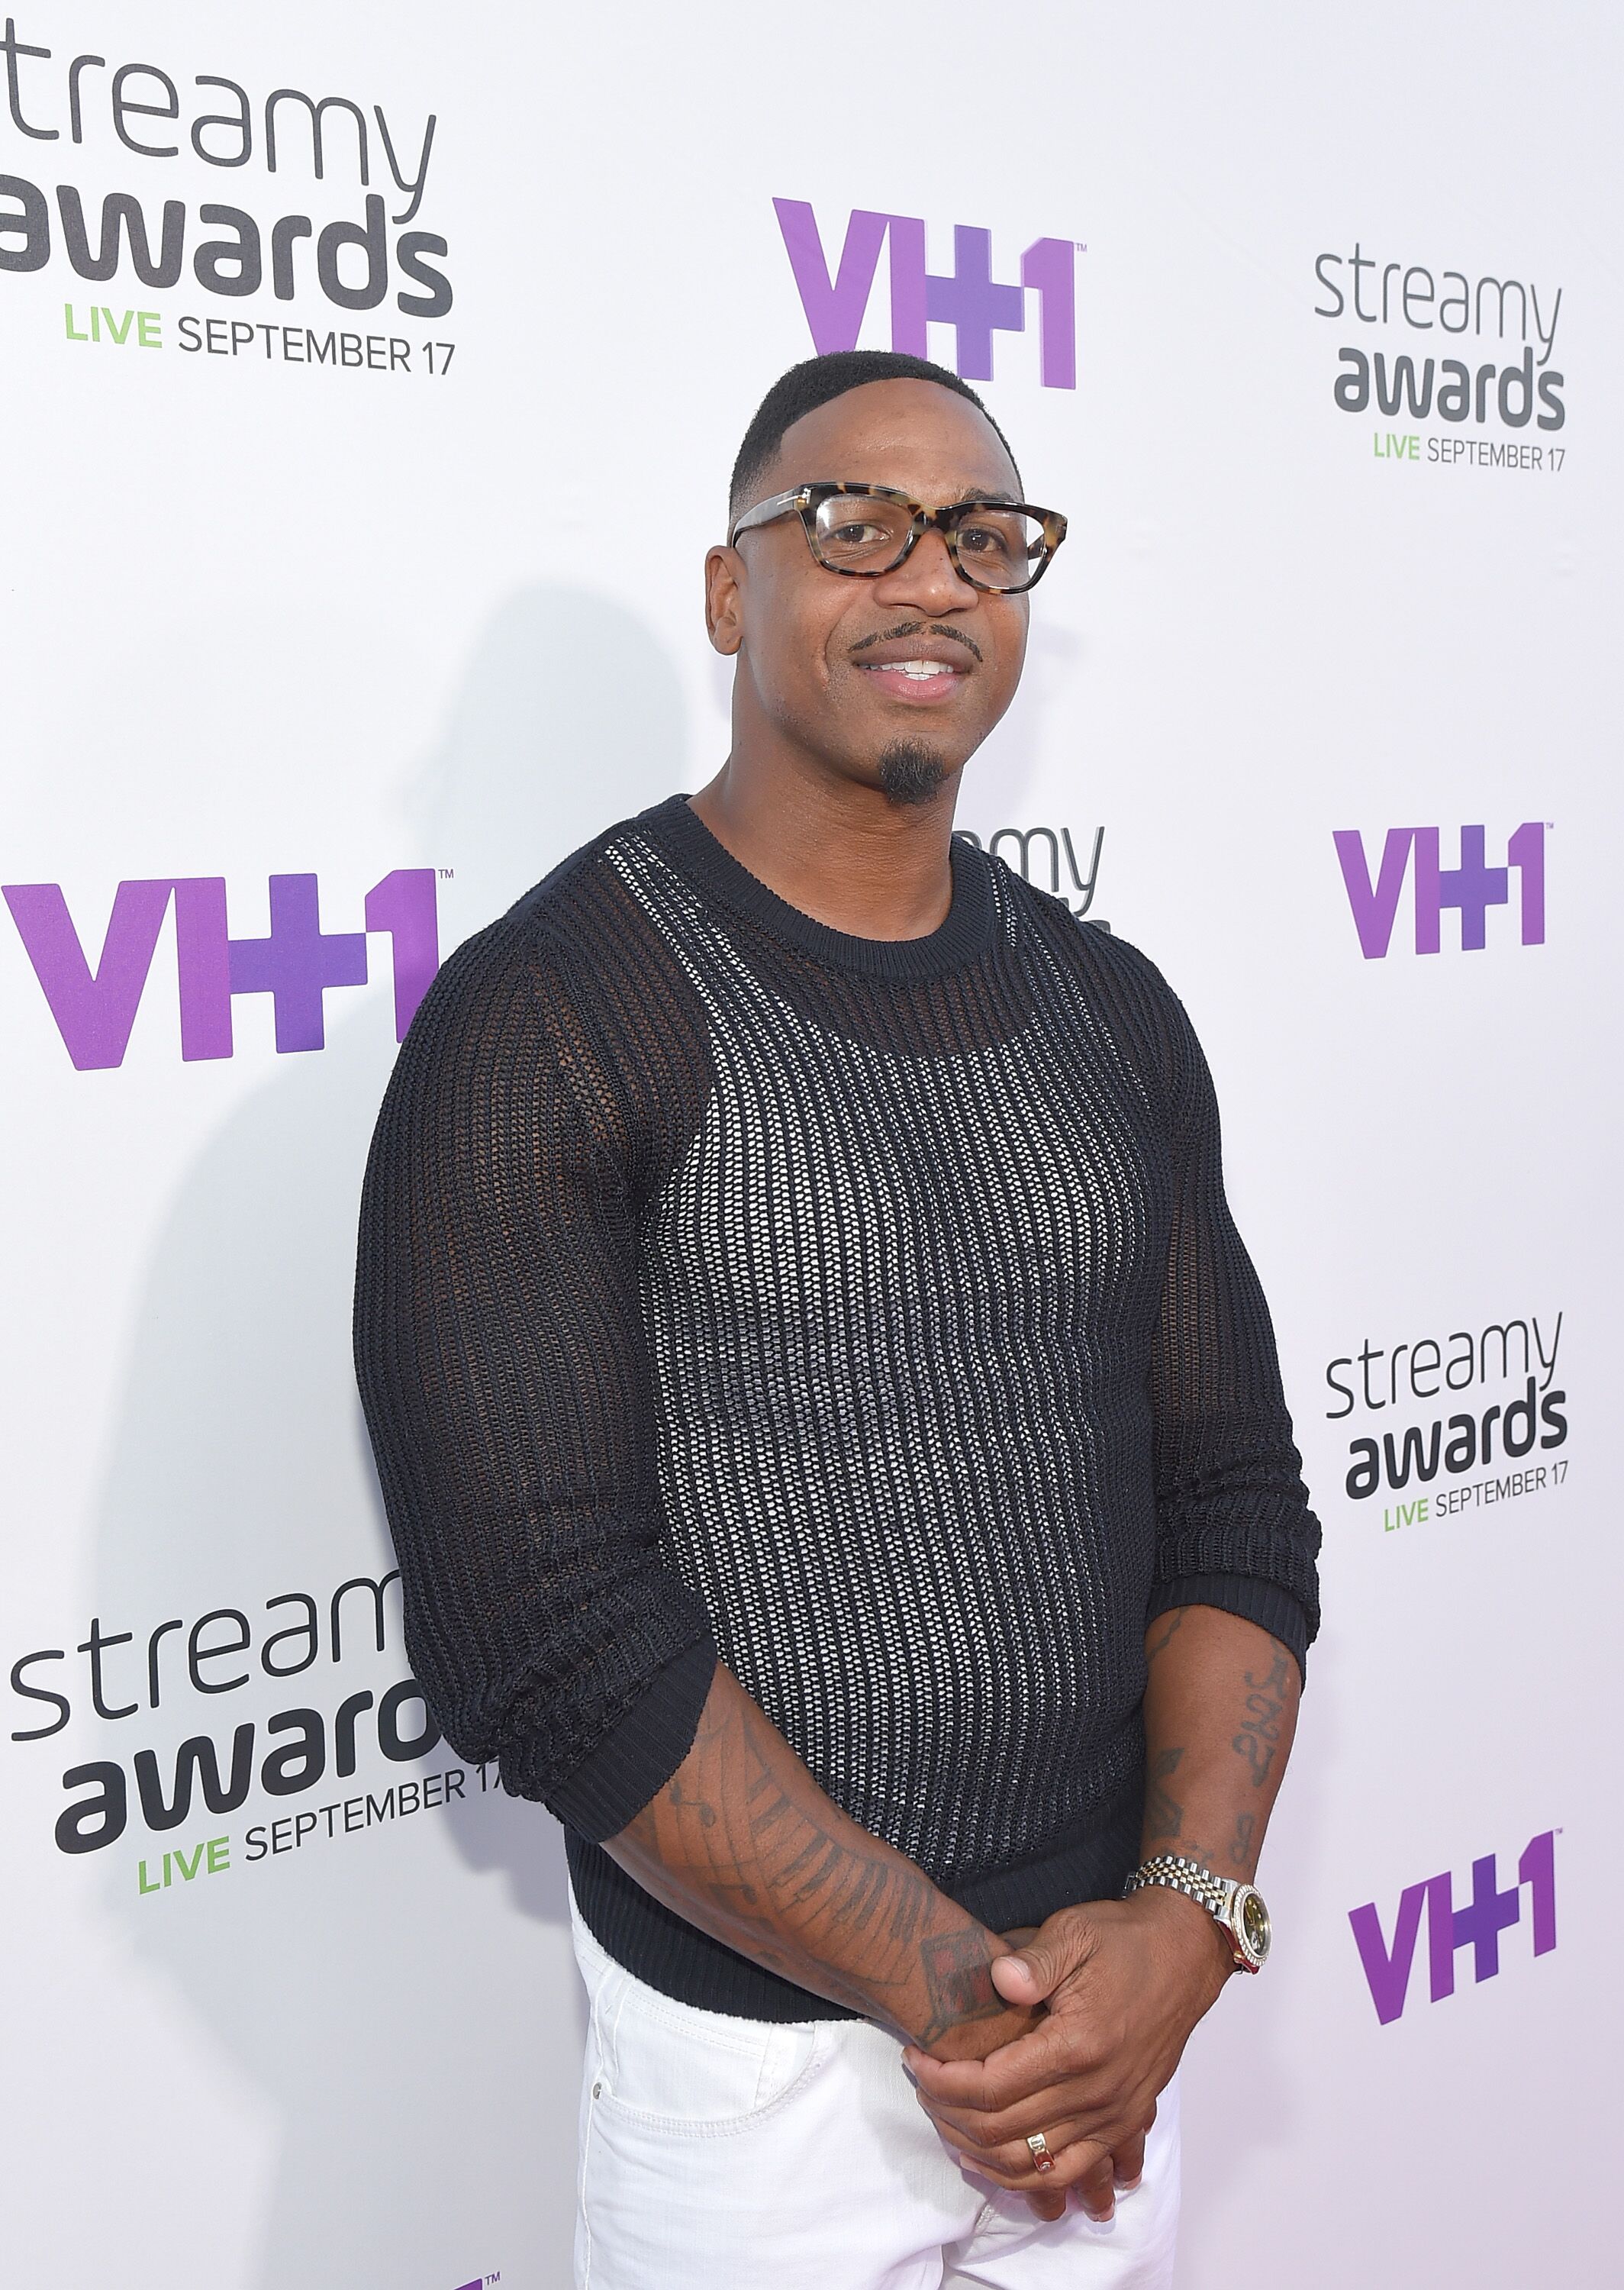 Stevie J attends the VH1 Streamy Awards | Source: Getty Images/GlobalImagesUkraine